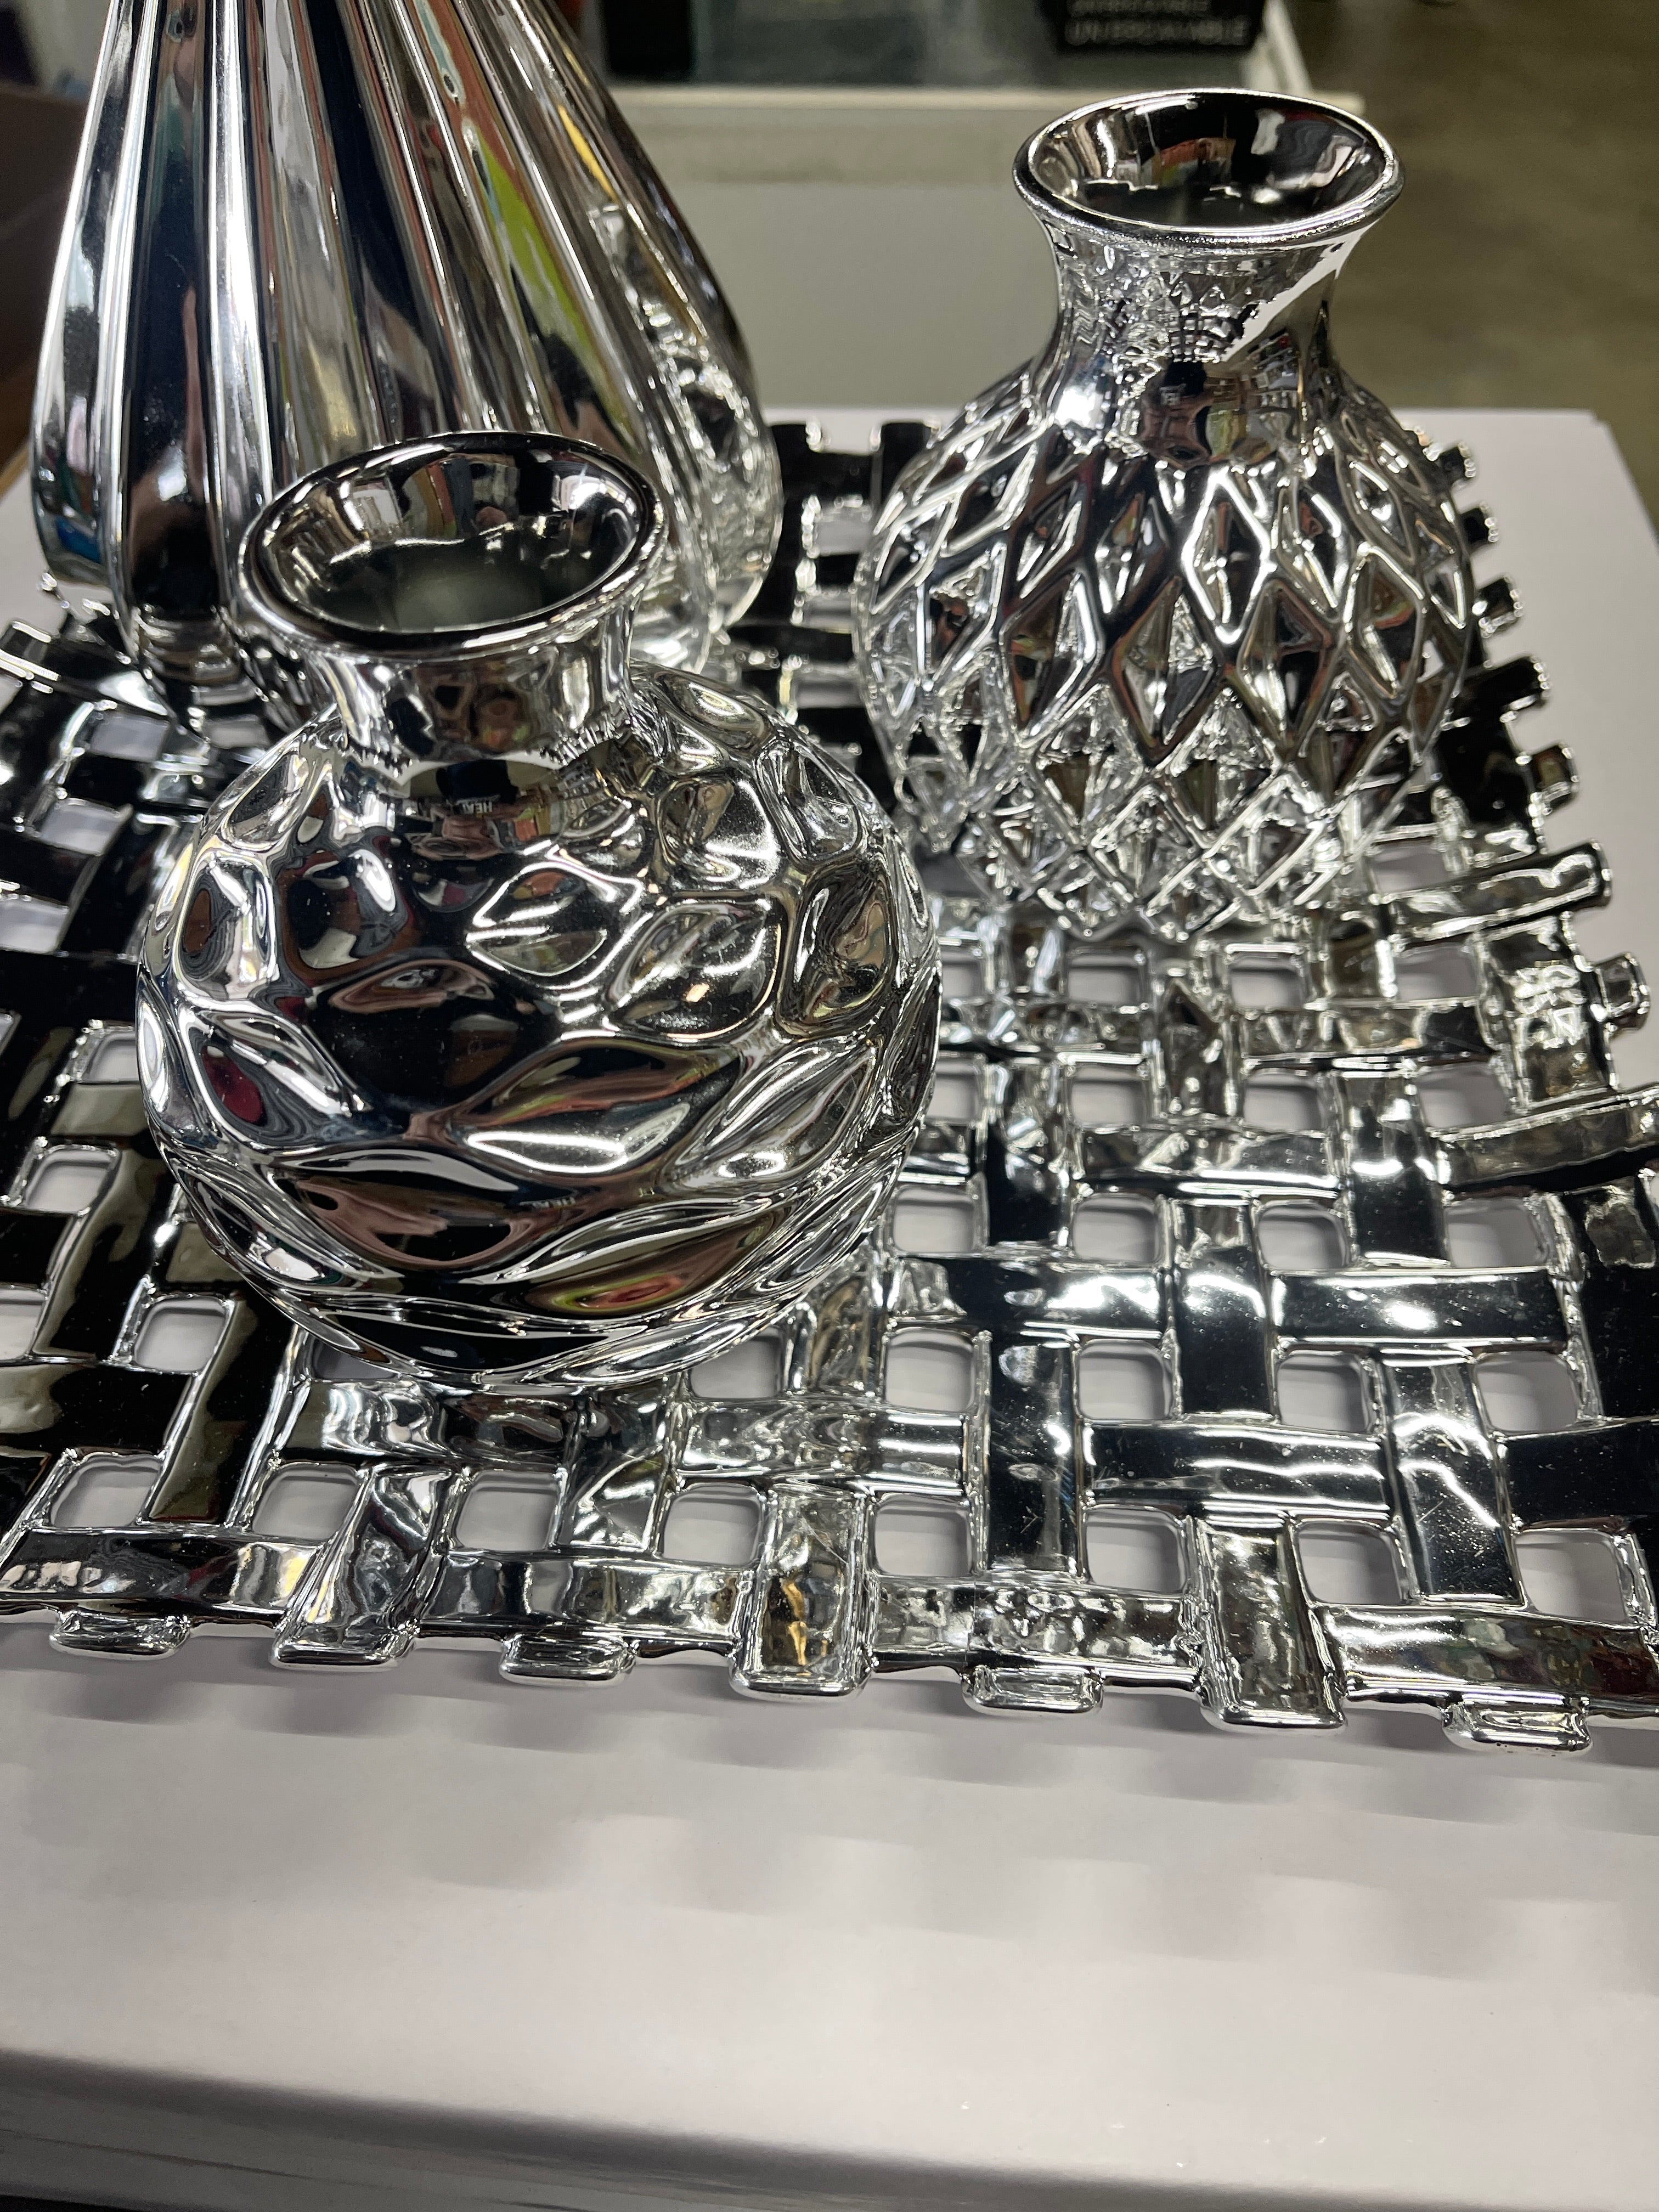 4 Piece Silver Vase Set with 12" x 12" Tray